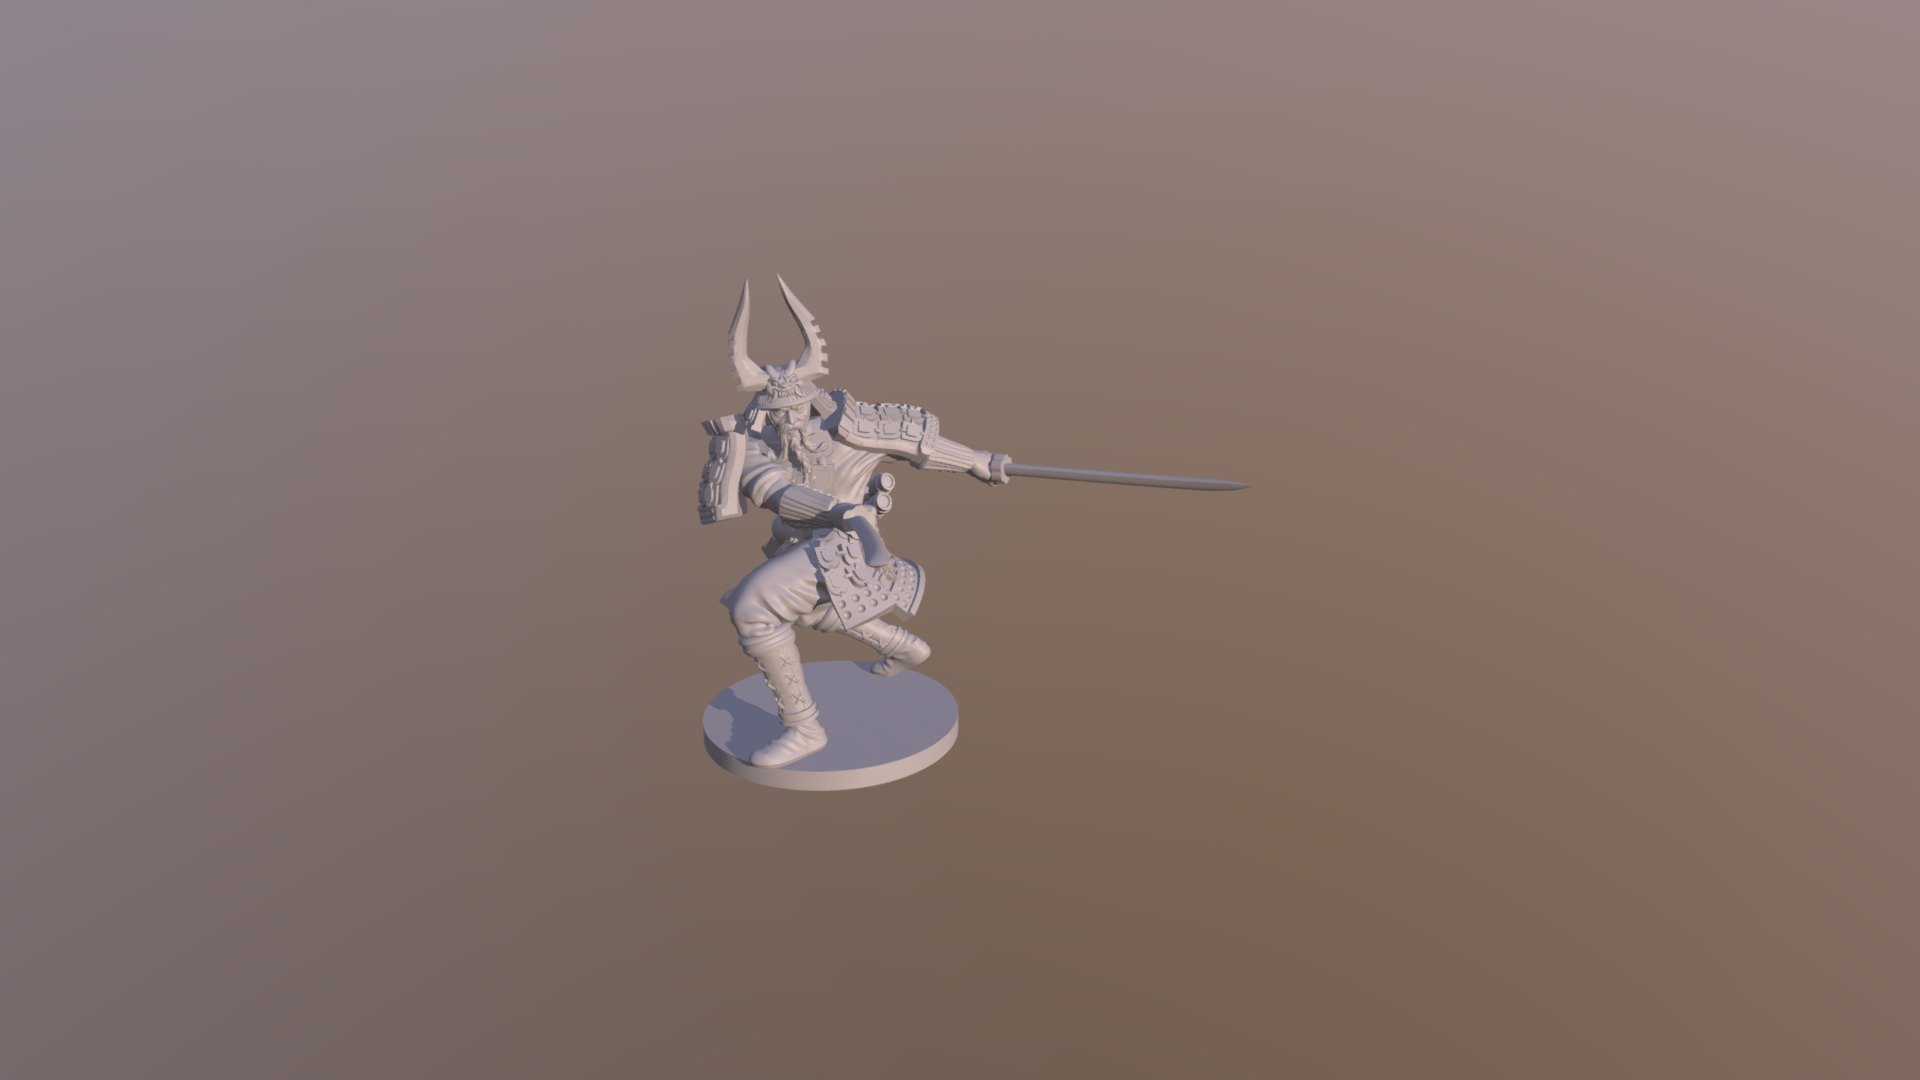 Mugen miniature model for Shadow Tactics board game by Antler Games.

Mugen, the leader. A samurai himself, he's the only one capable of killing a samurai guard with his katana.

Learn more at: https://antlergames.com/shadowtactics/ - Mugen - Shadow Tactics board game - hi-res - 3D model by antlergames 3d model